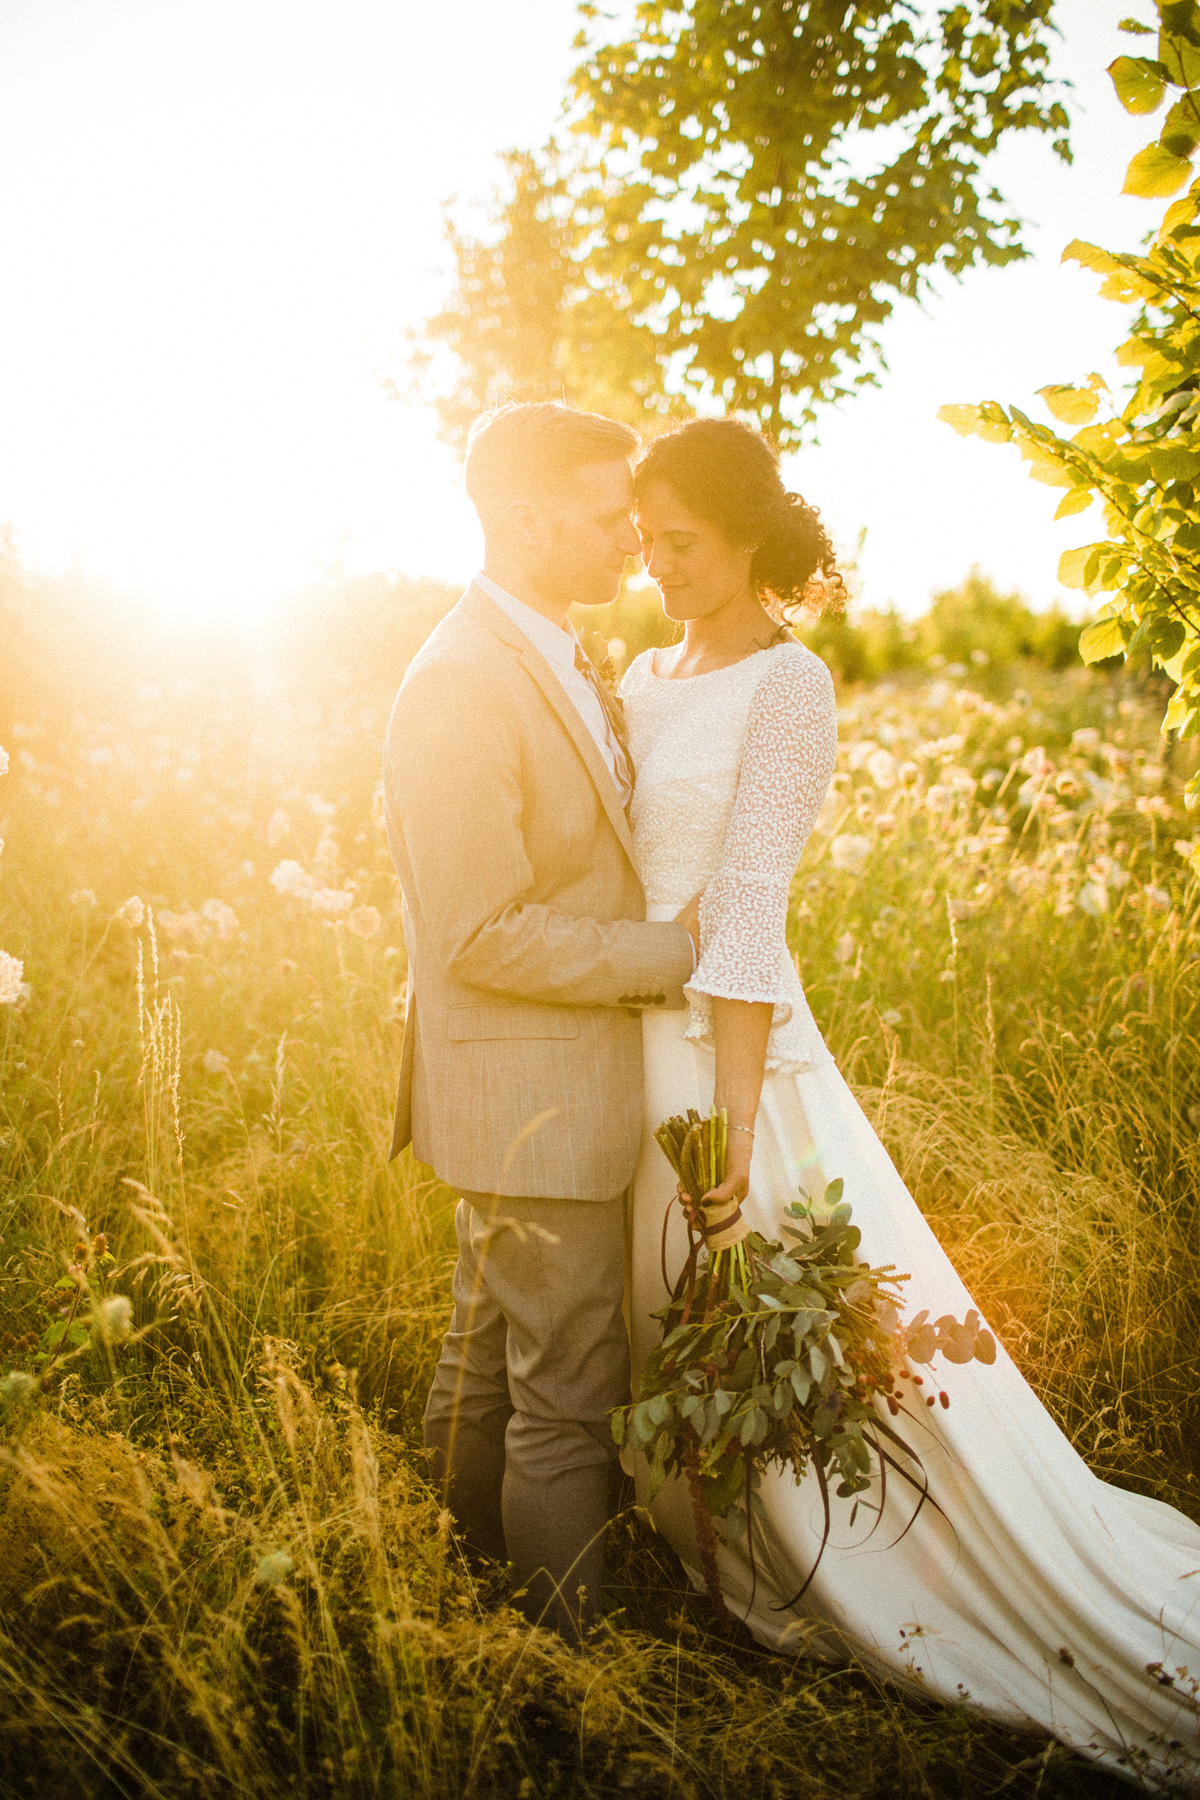 Claudia Rose Carter modern relaxed wedding Photography 15